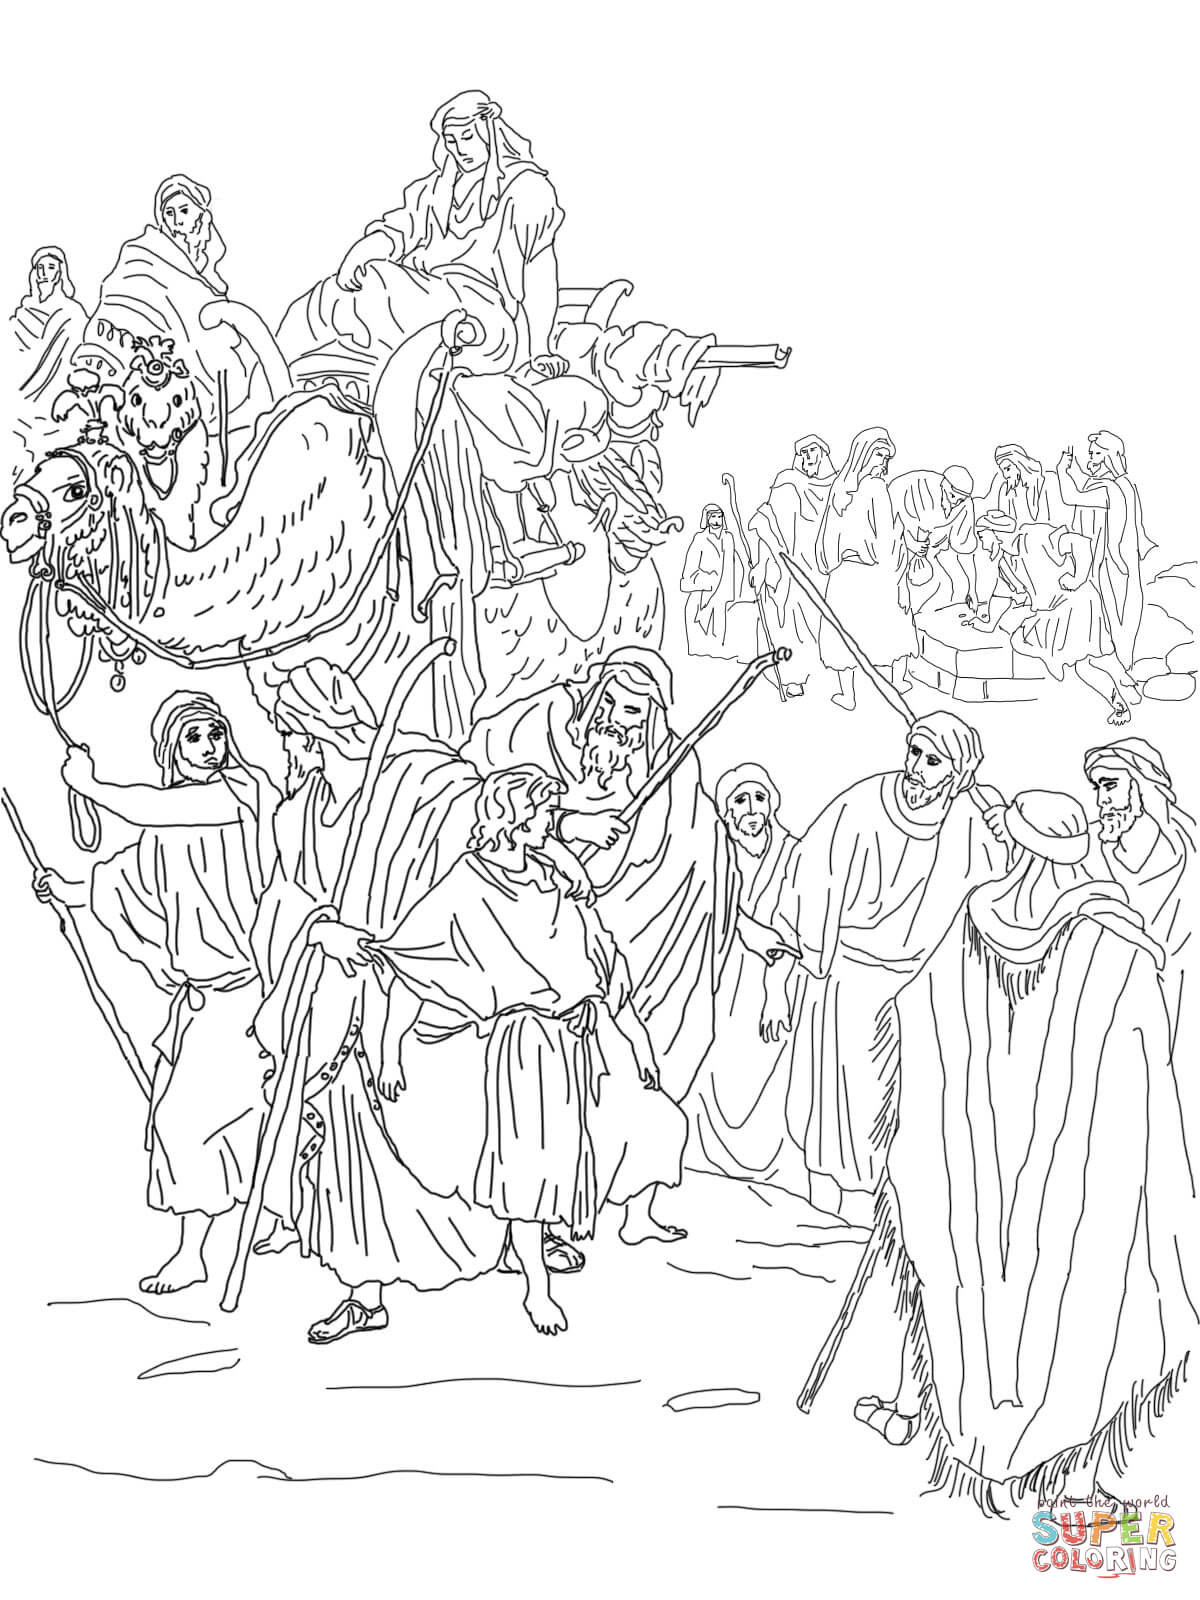 Joseph Sold Into Slavery Coloring Pages
 Joseph Sold Coloring Page Coloring Home